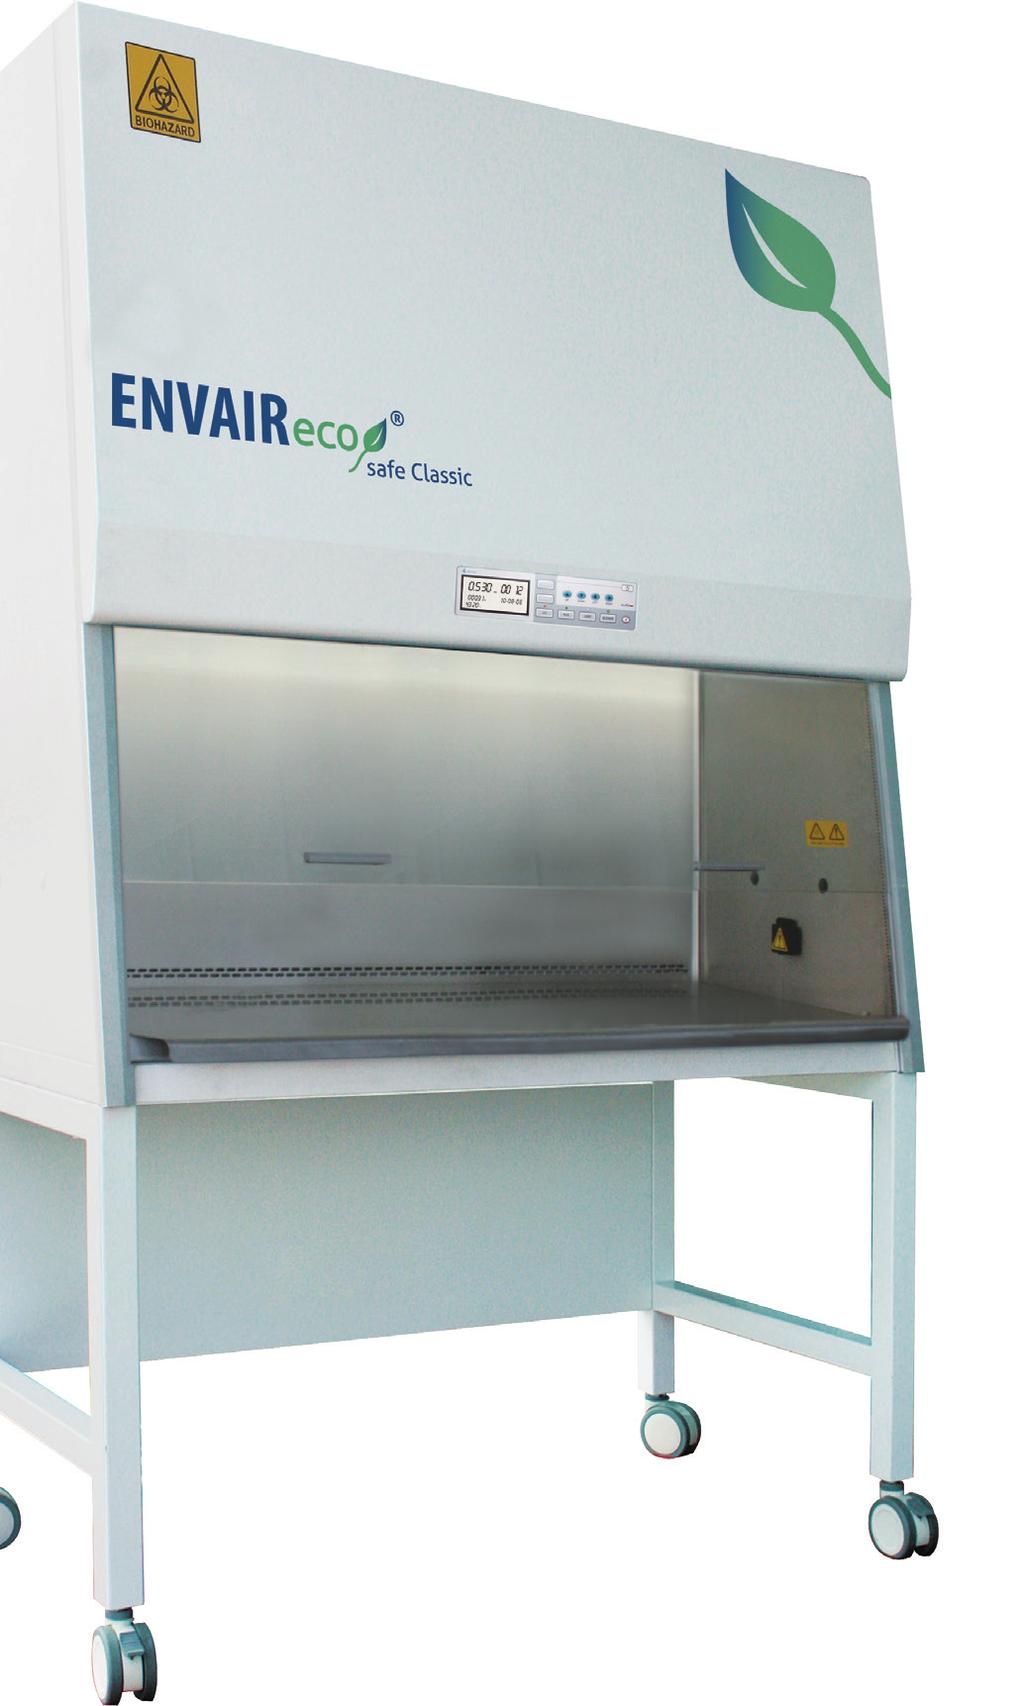 Clean technology for a clean environment ENVAIR eco safe Classic the clean generation ENVAIR eco safe Classic Microbiological Safety Cabinets belong to the latest generation of laminar airflow